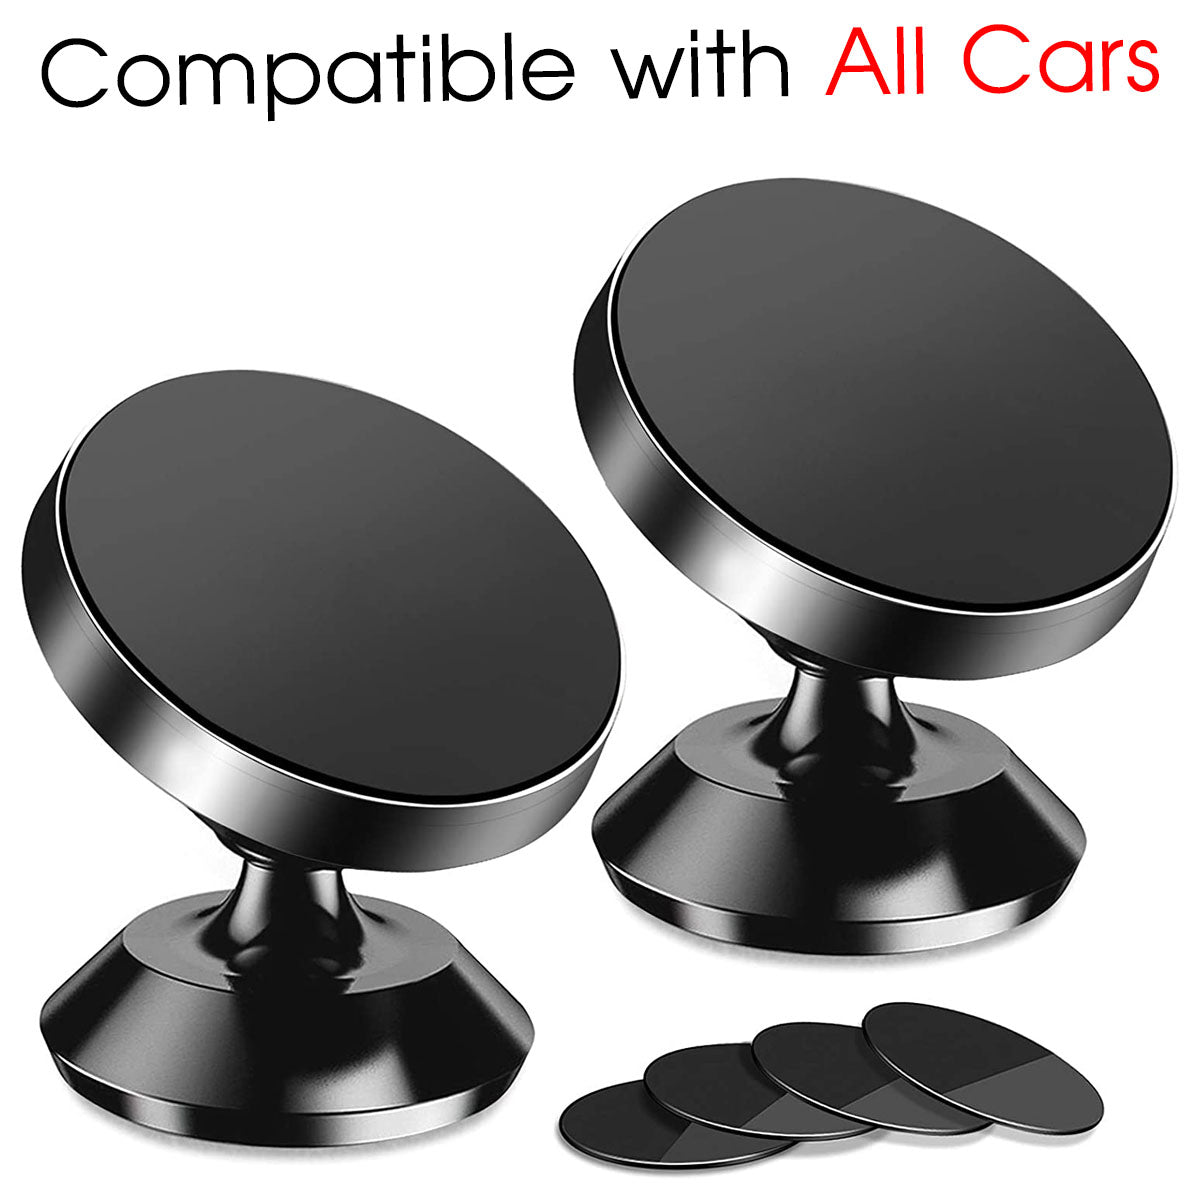 [2 Pack ] Magnetic Phone Mount, Custom For Your Cars, [ Super Strong Magnet ] [ with 4 Metal Plate ] car Magnetic Phone Holder, [ 360° Rotation ] Universal Dashboard car Mount Fits All Cell Phones, Car Accessories HA13982